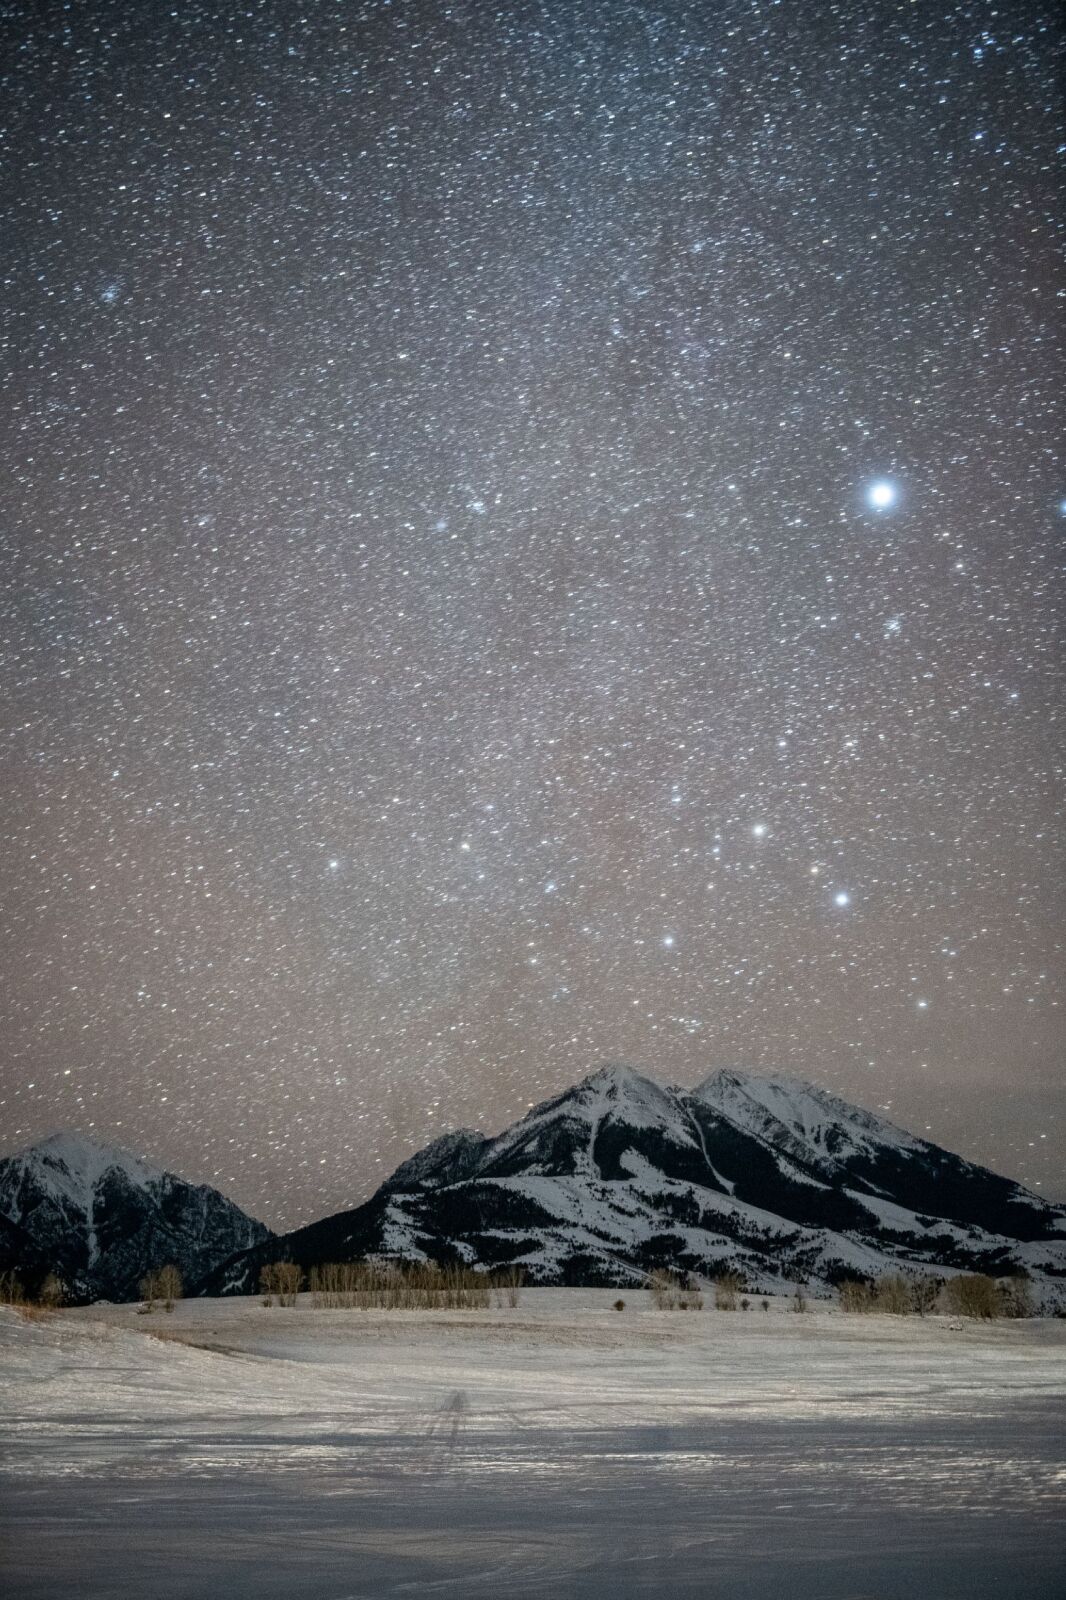 Stars over Sage Lodge one of the best stargazing hotels in the US